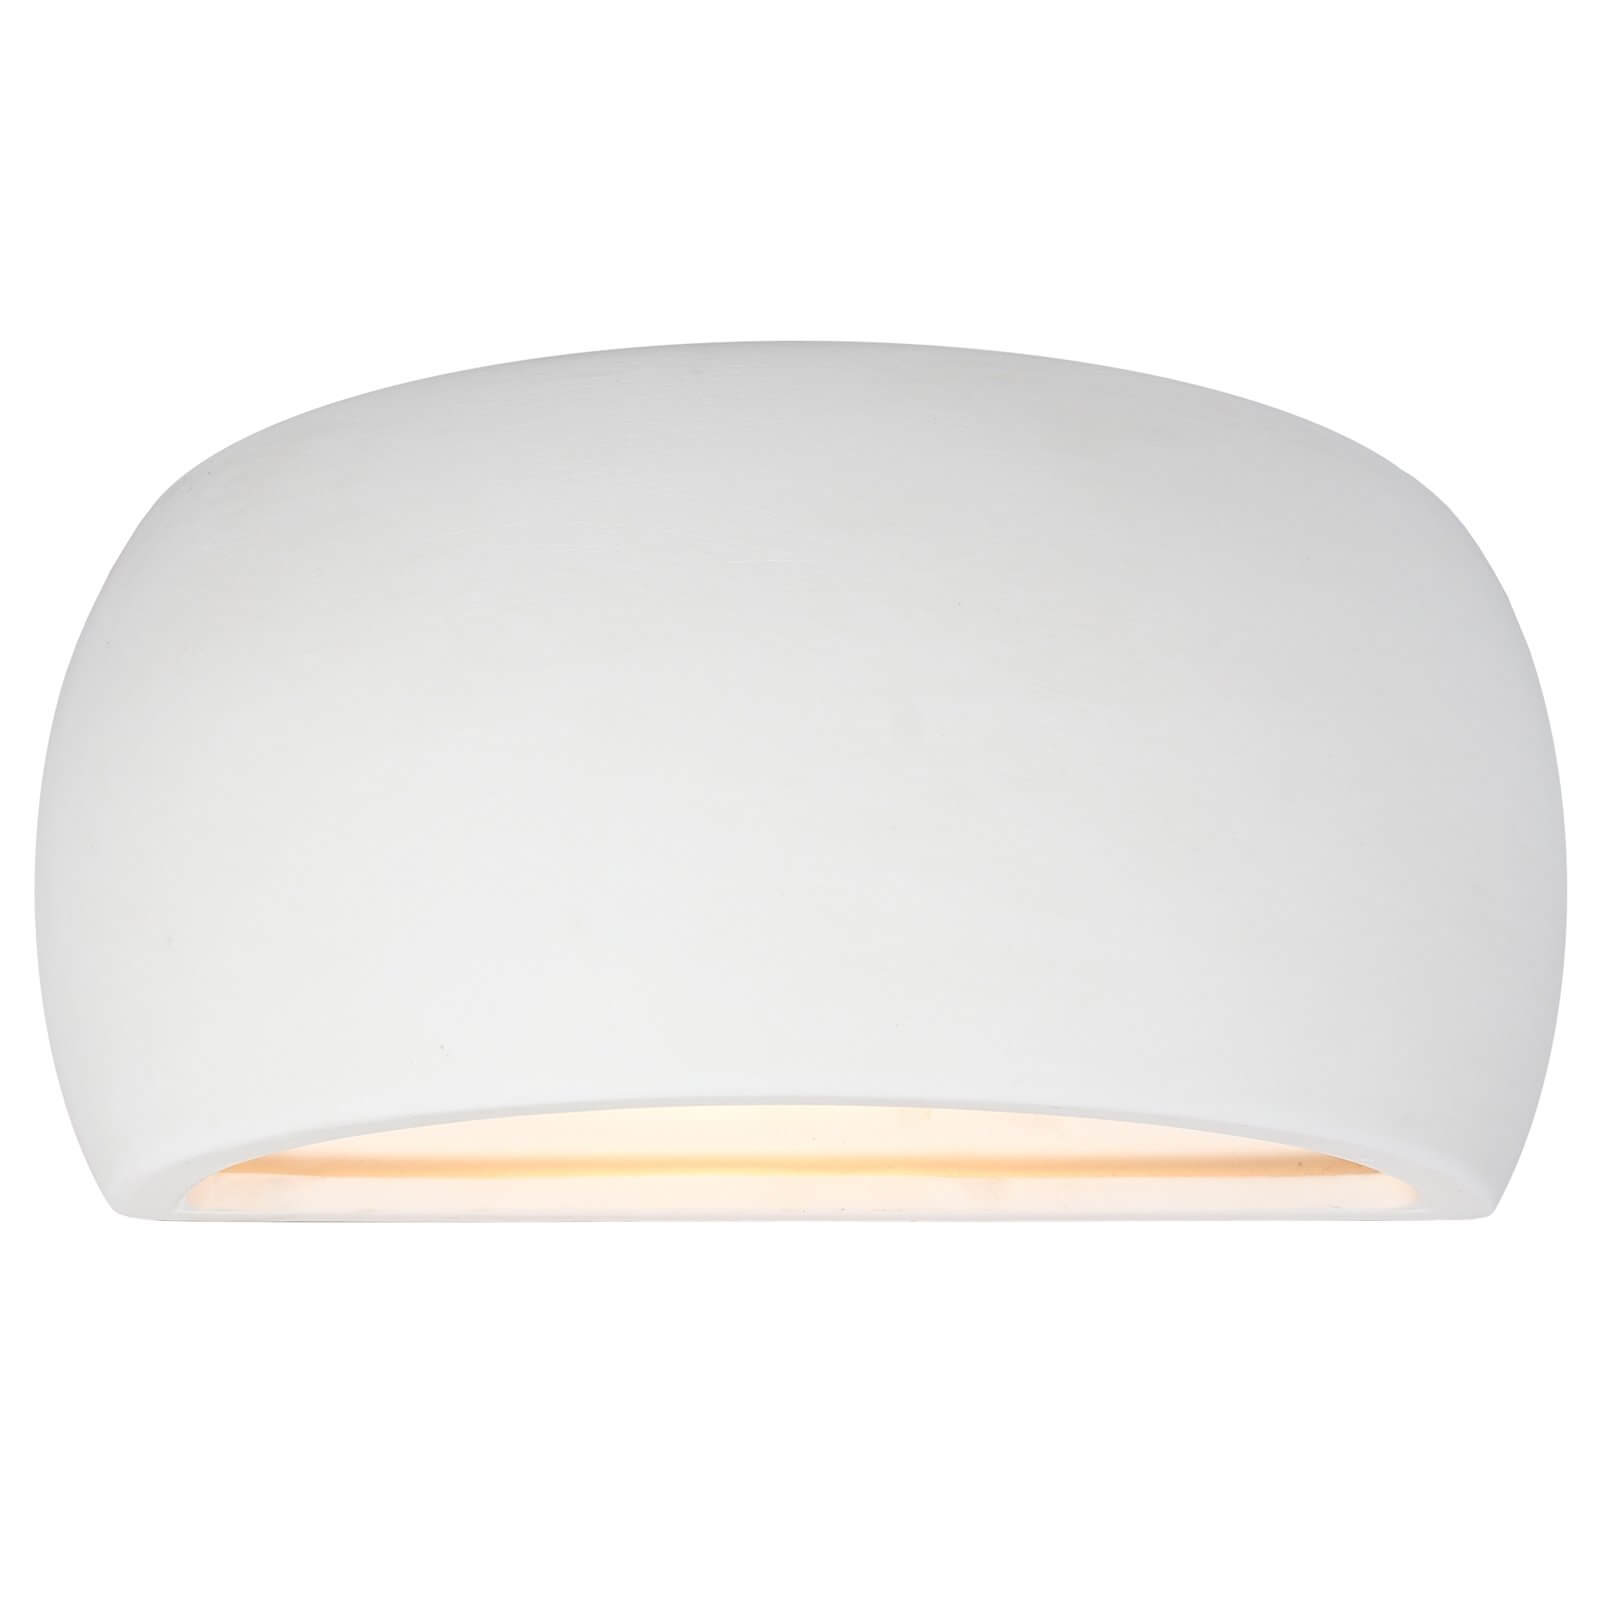 Adelie Ceramic Curved Wall Light